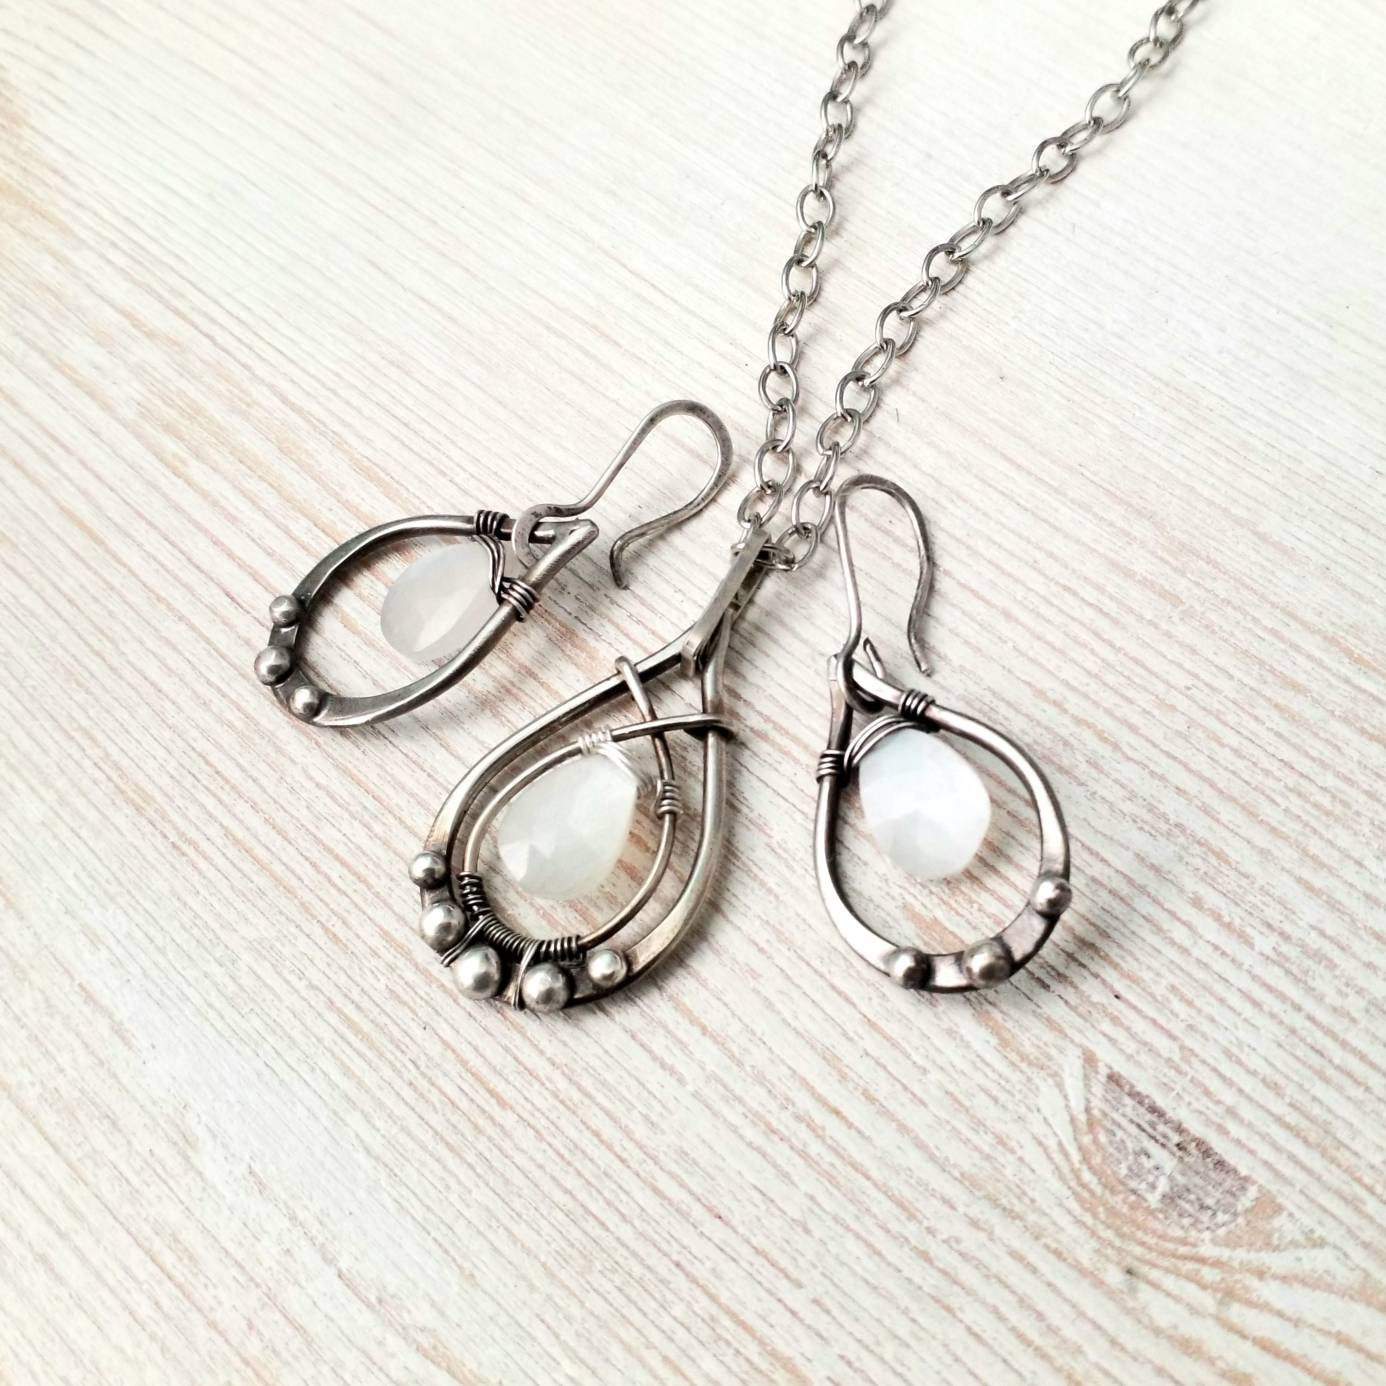 Silver wire wrap moonstone set pendant and earrings silver | Etsy